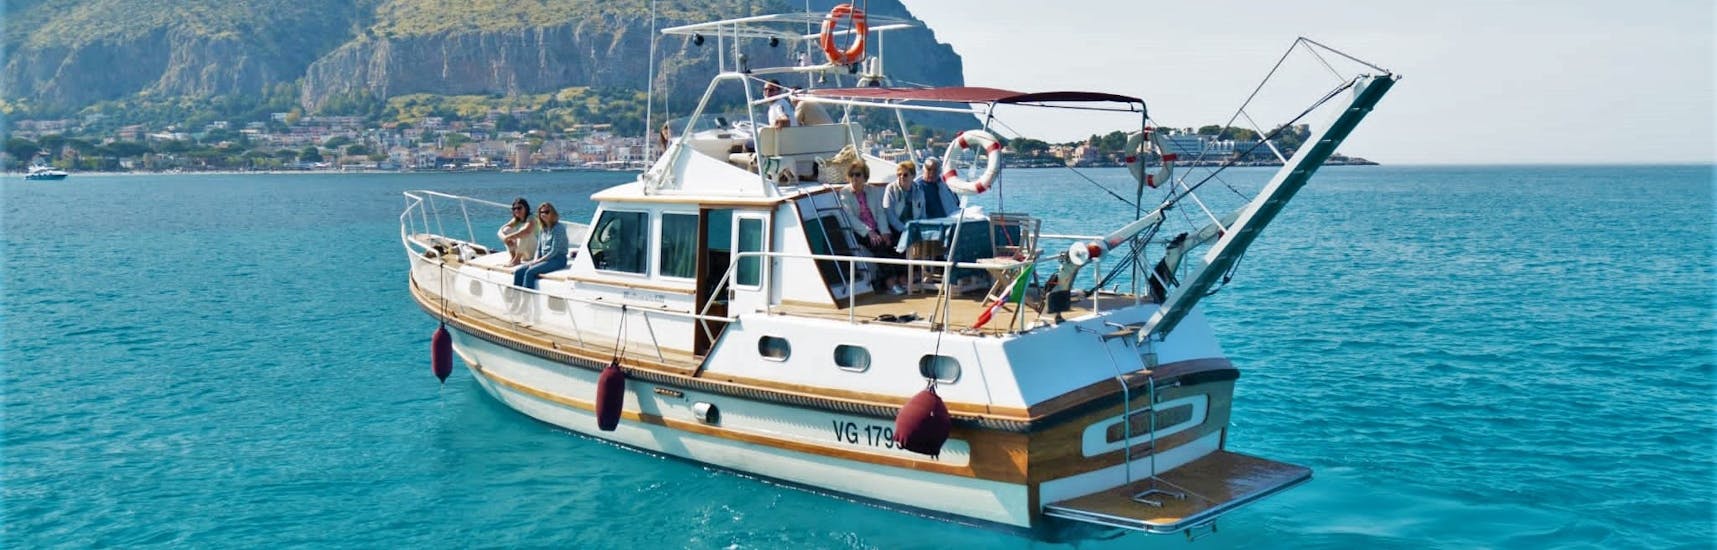 The boat used by Seica Boat during the boat trip from Palermo to Mondello Beach with apéritif.